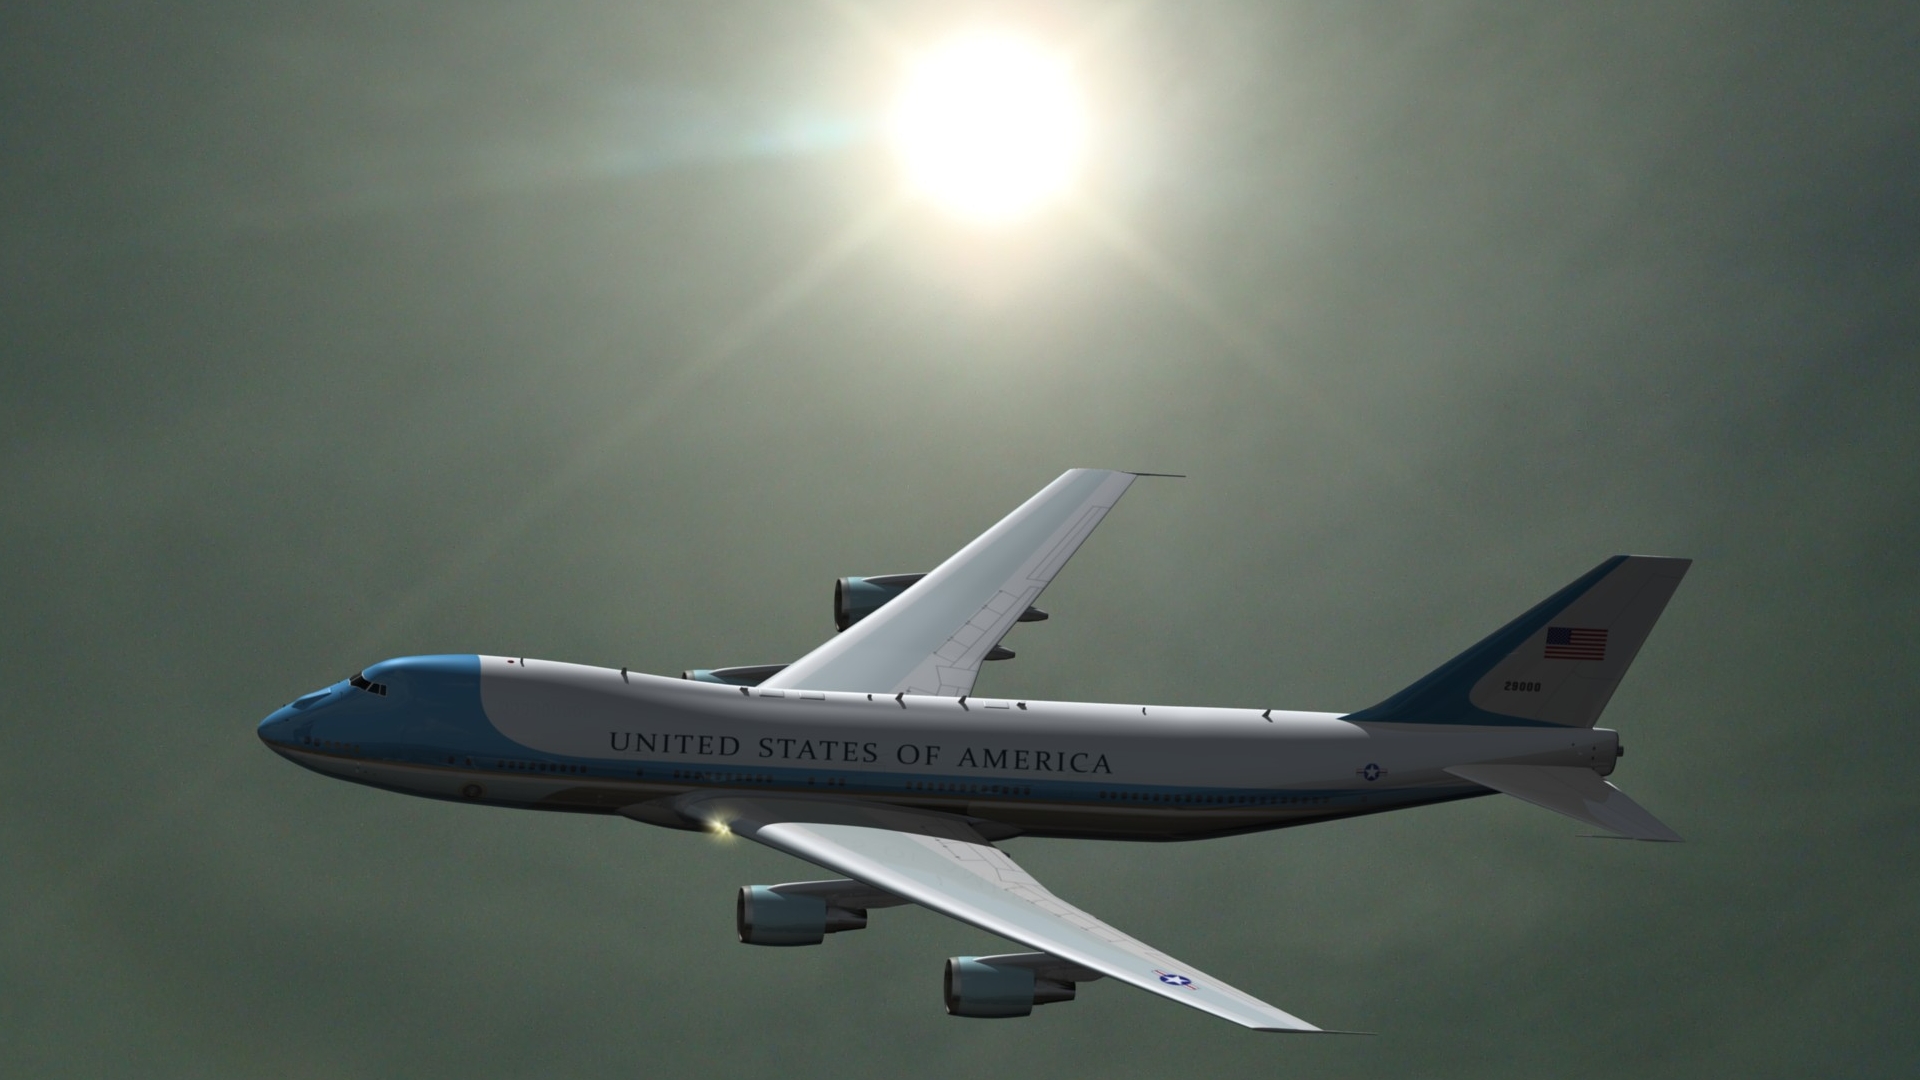 Air Force One by Emigepa on DeviantArt